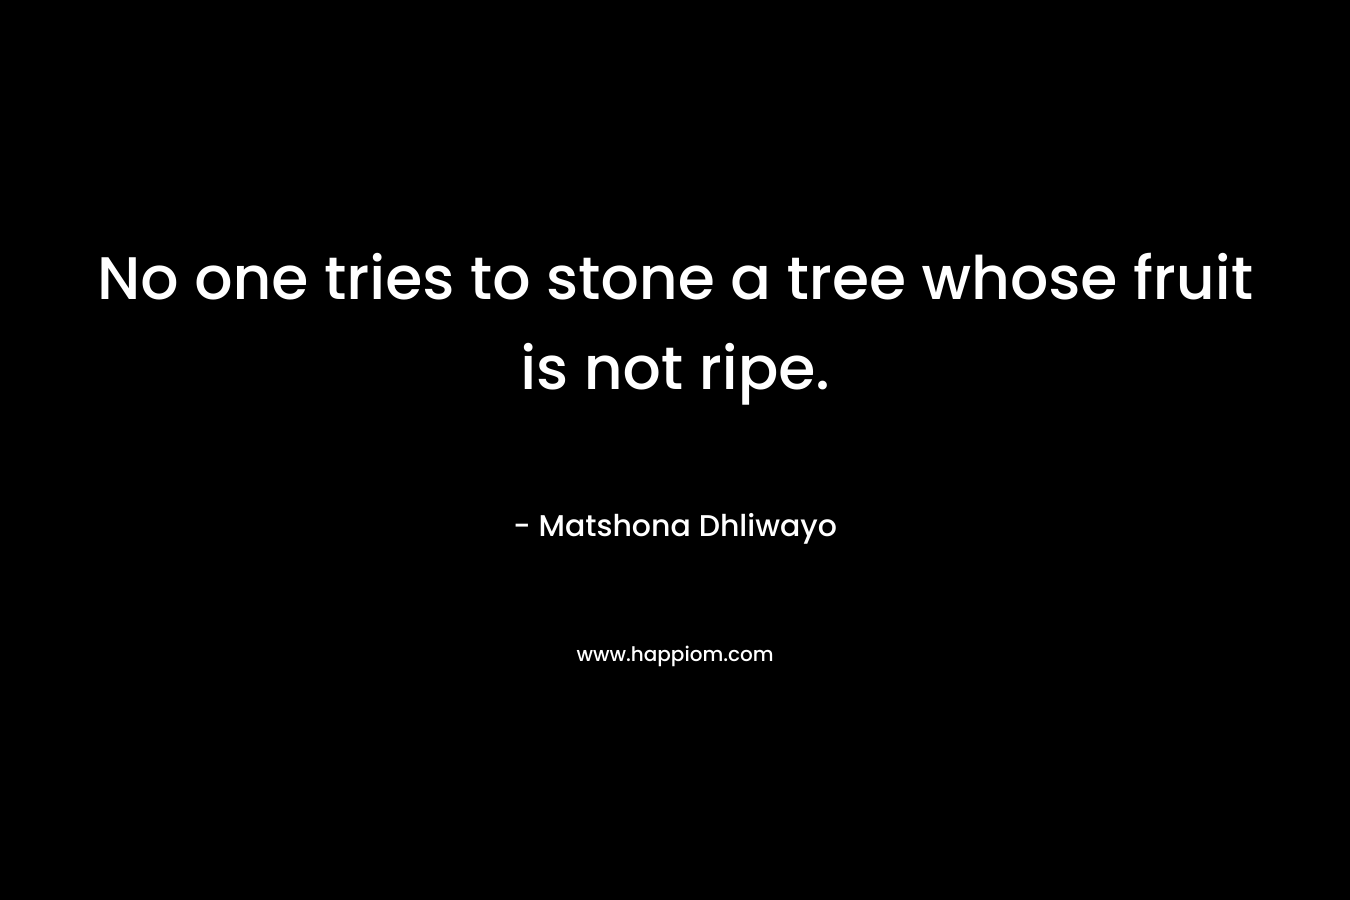 No one tries to stone a tree whose fruit is not ripe.